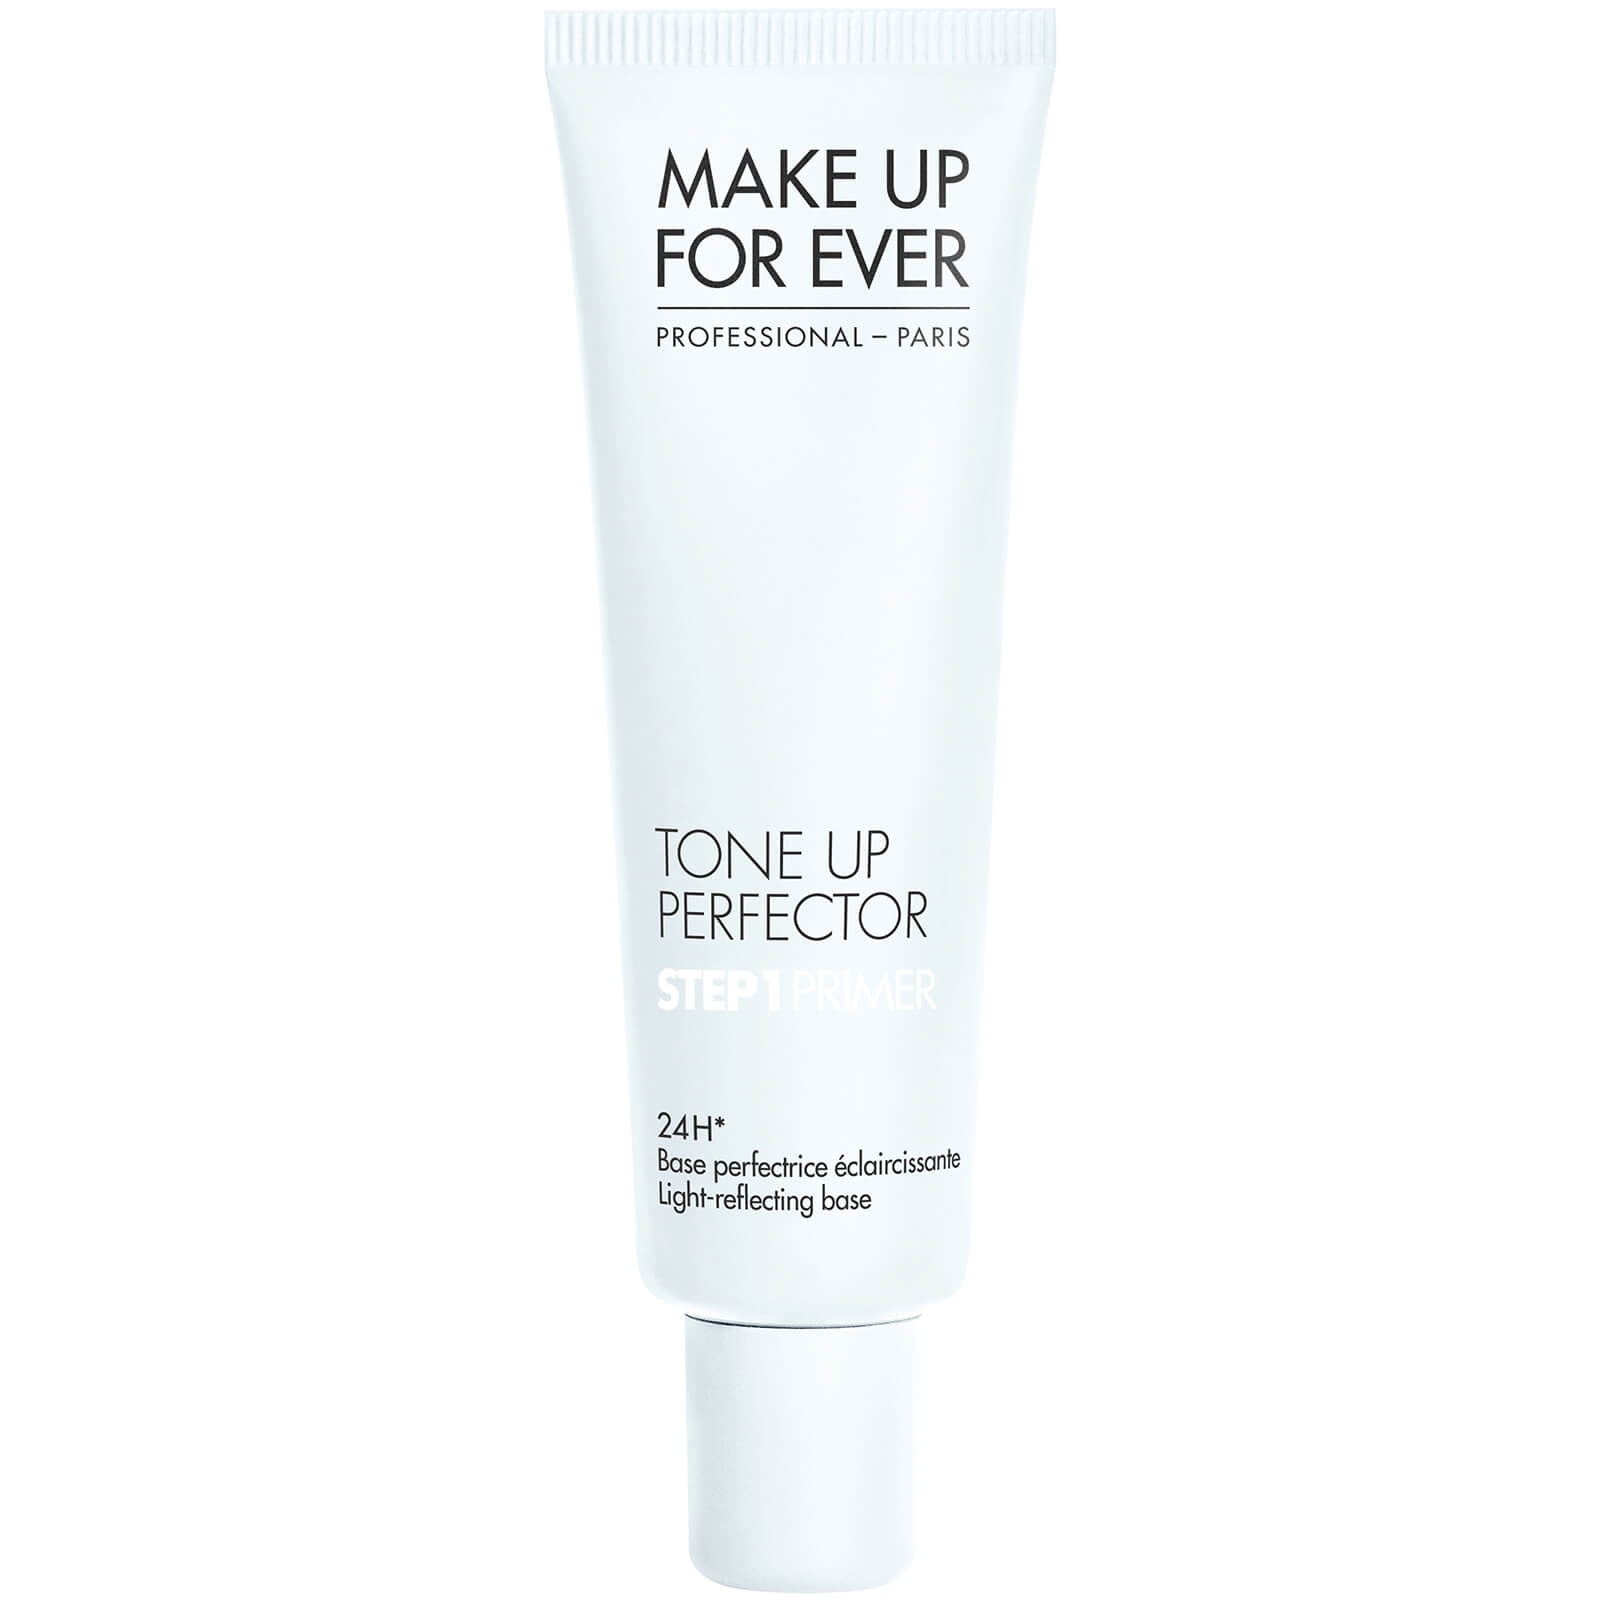 MAKE UP FOR EVER Step 1 Primer 30ml (Various Shades) - Tone Up Perfector